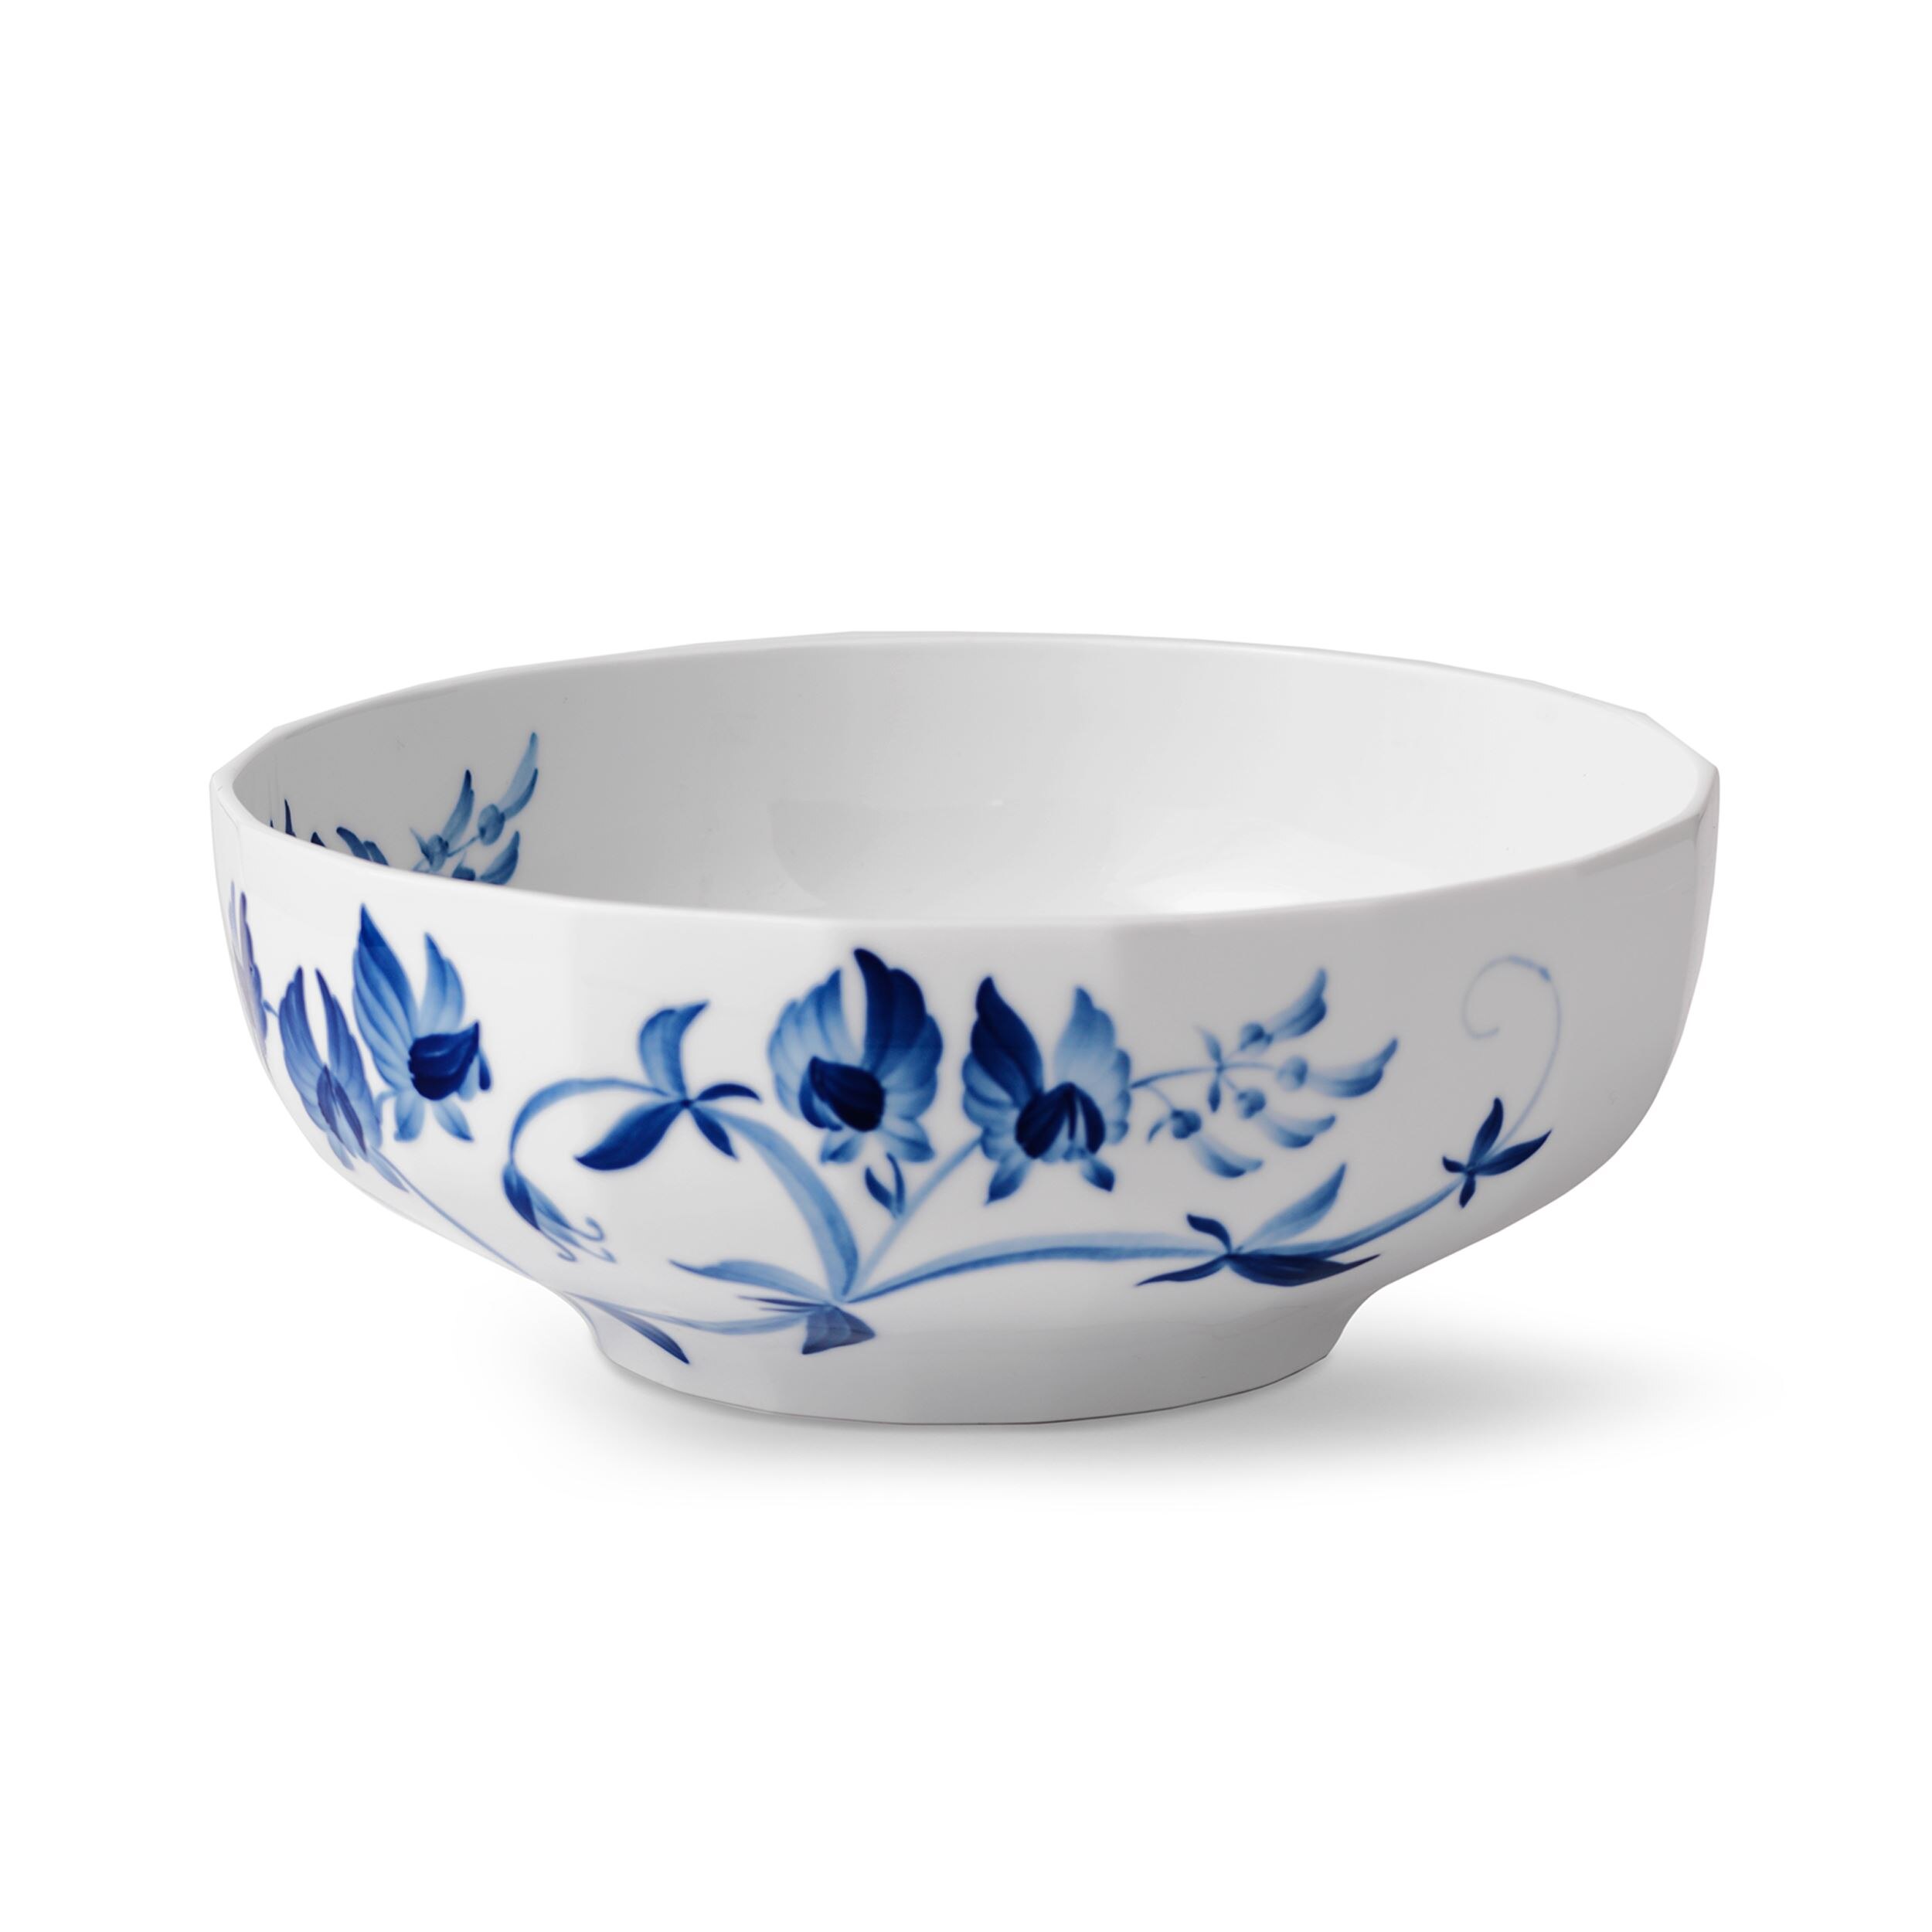 Royal Copenhagen Blue Flowers Braided Coupe Cereal Bowl (Imperfect) (8156)